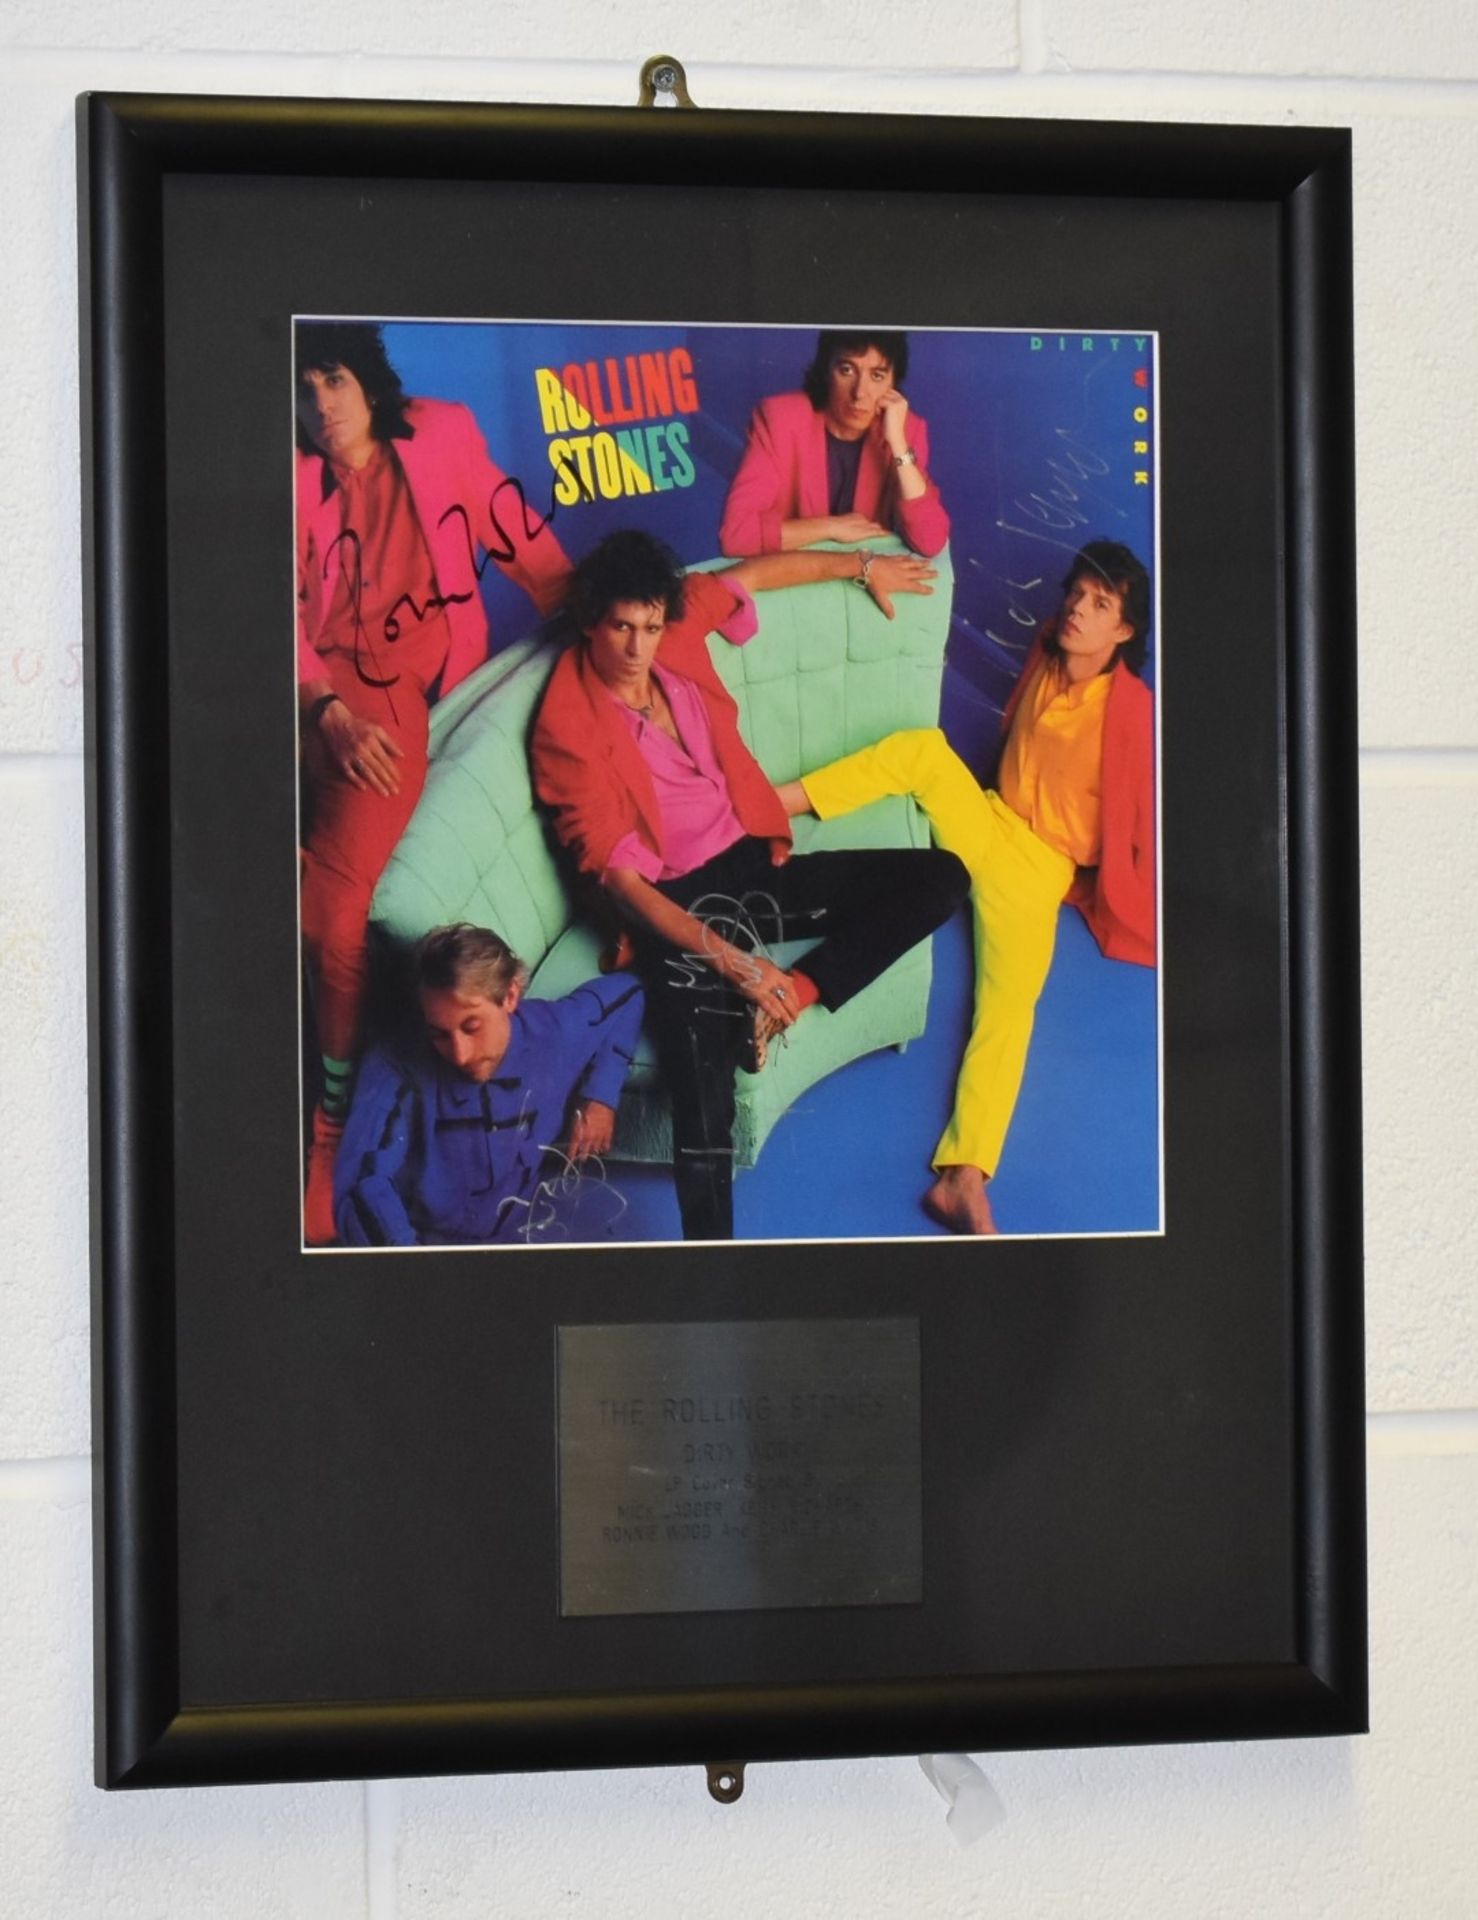 1 x Authentic ROLLING STONES Dirty Work Album Cover Signed By Jagger, Richards, Wood & Watts